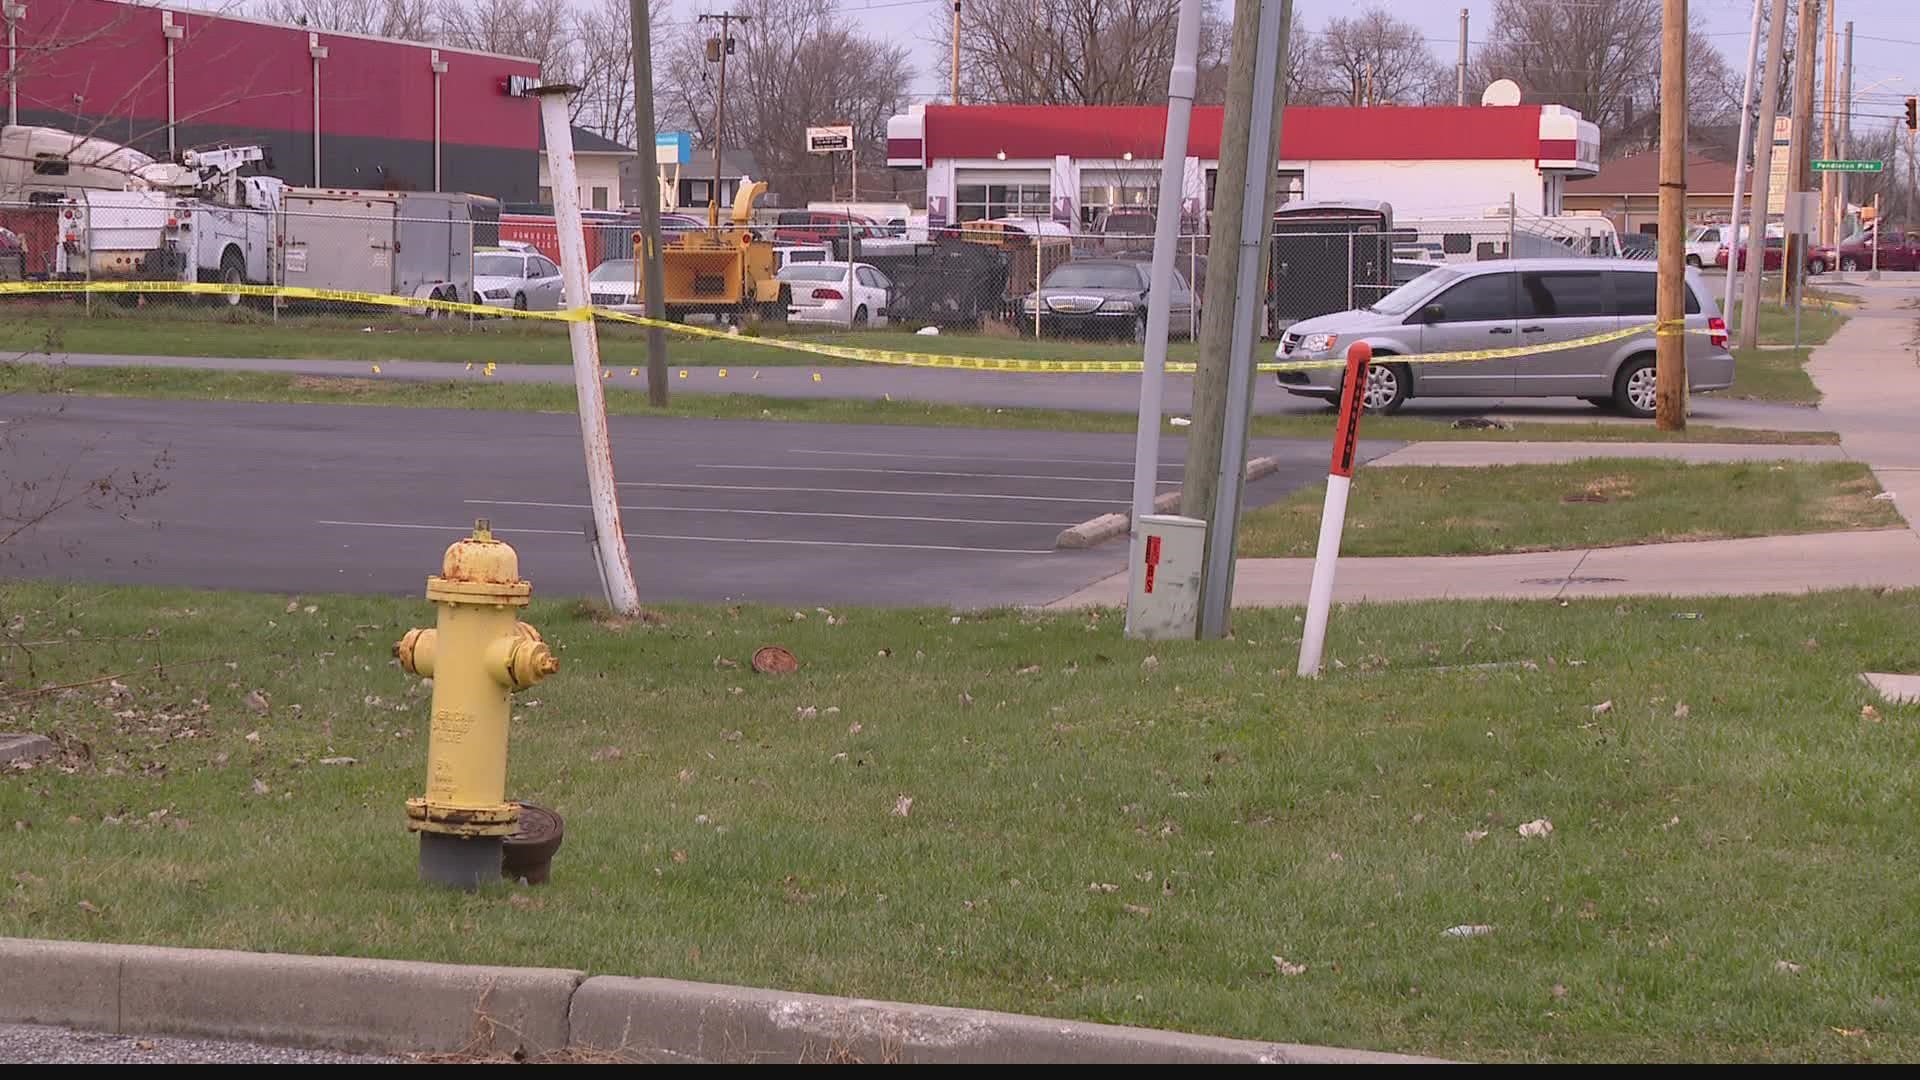 Police say a worker pulled a gun on a teen who was attempting to rob Indy Pawn on Pendleton Pike. The teen is at Riley in unknown condition as of 5:21 p.m. Tuesday.